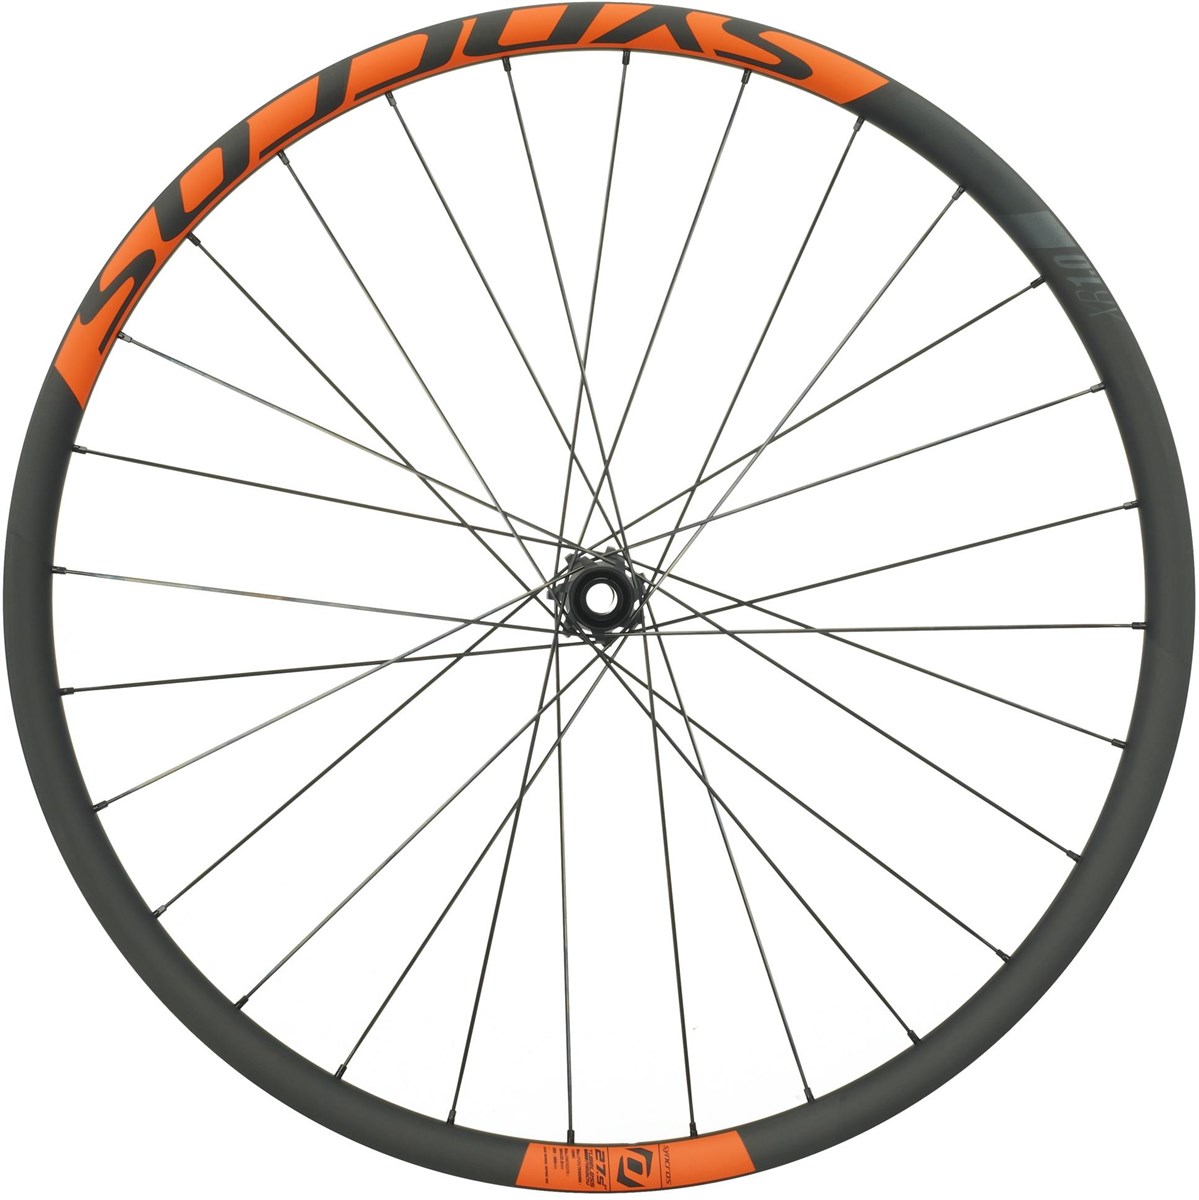 Syncros XR1.0 29" Carbon Wheel product image